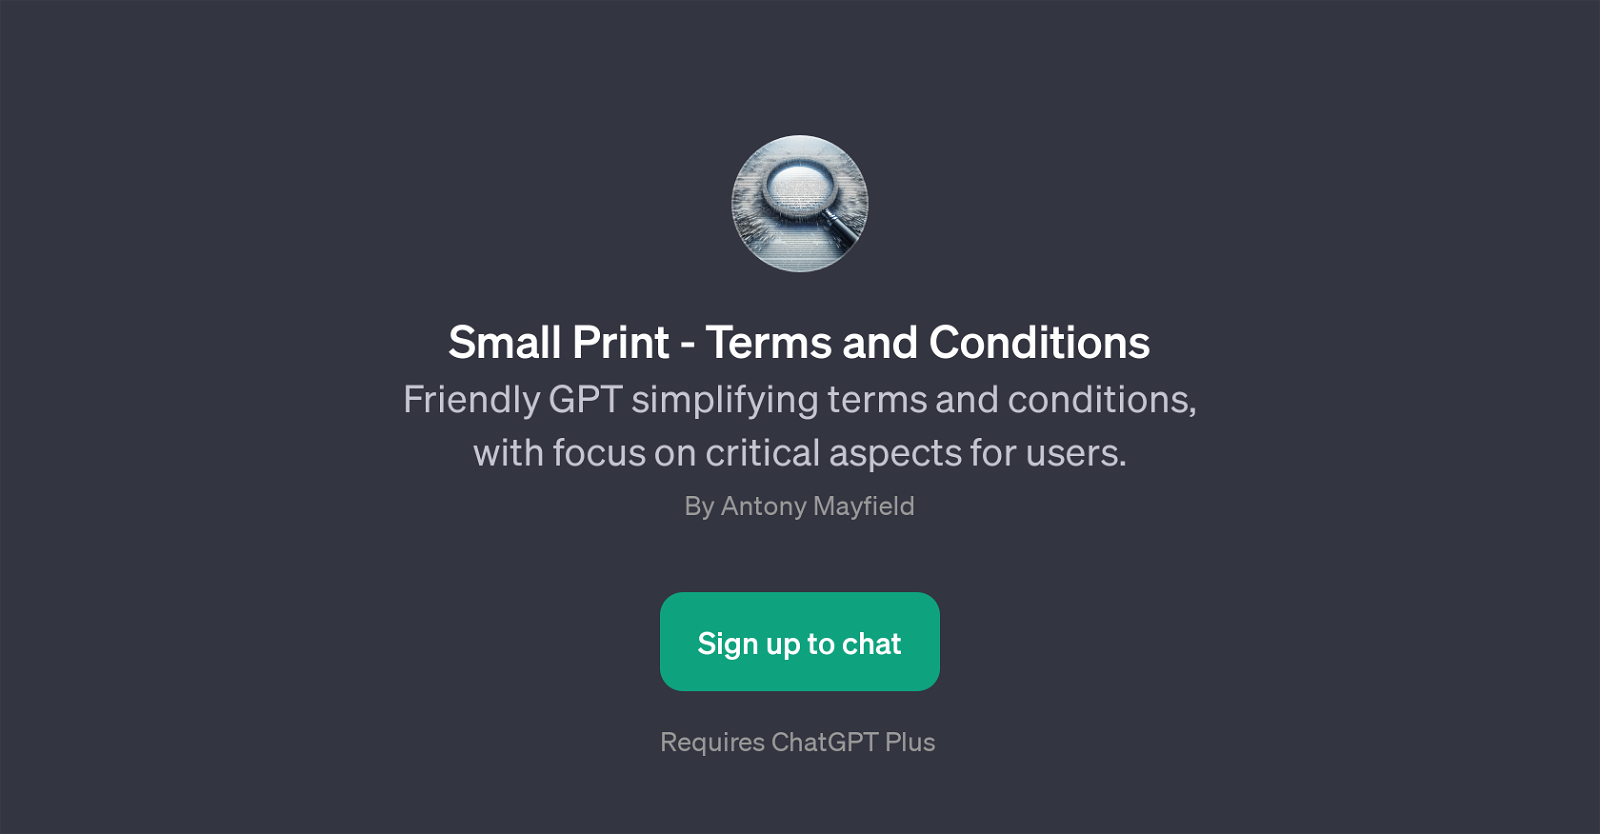 Small Print - Terms and Conditions website